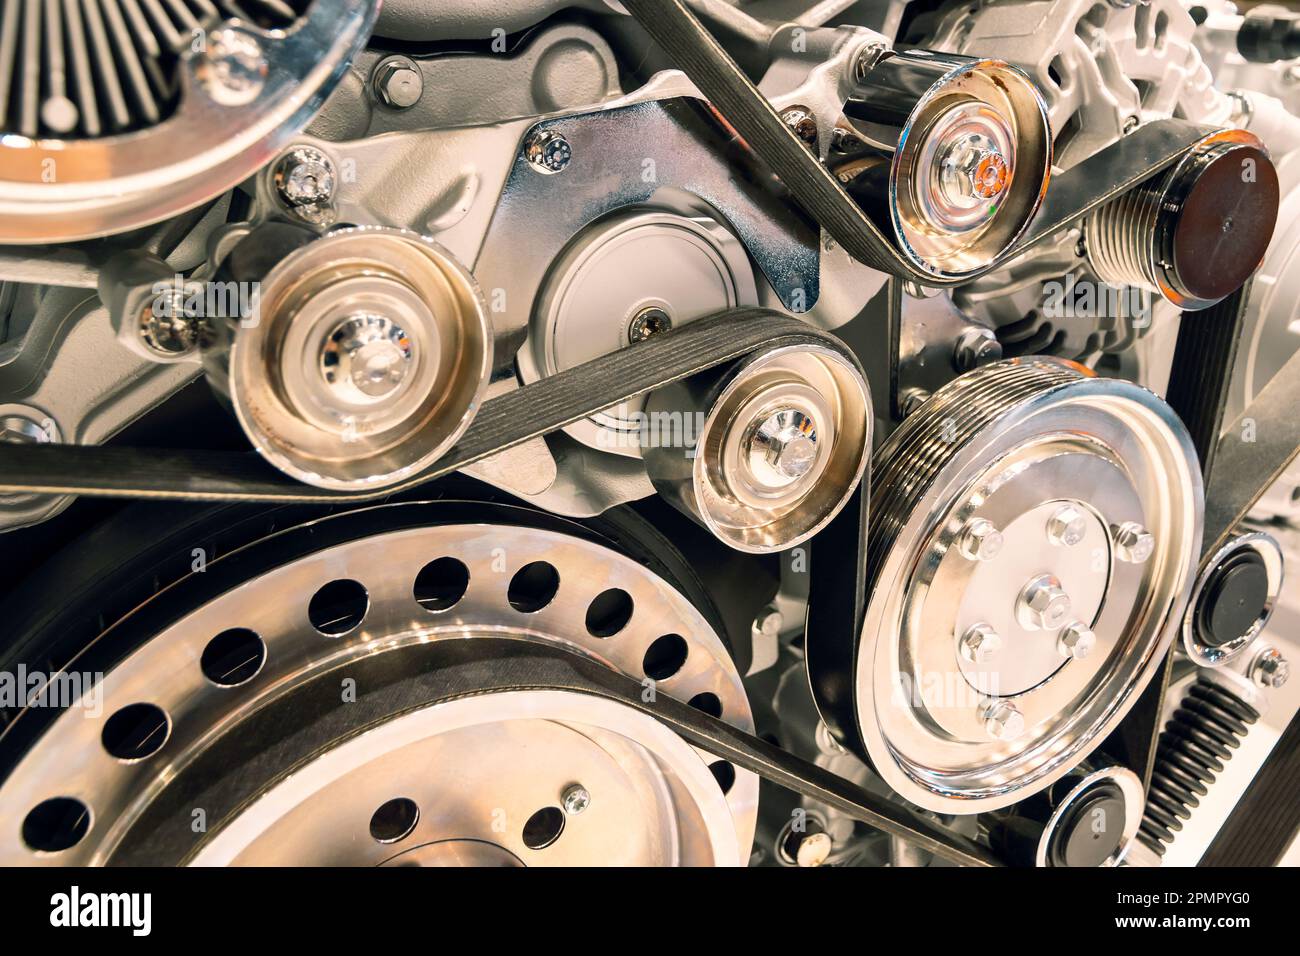 pulley belts car engine background Stock Photo